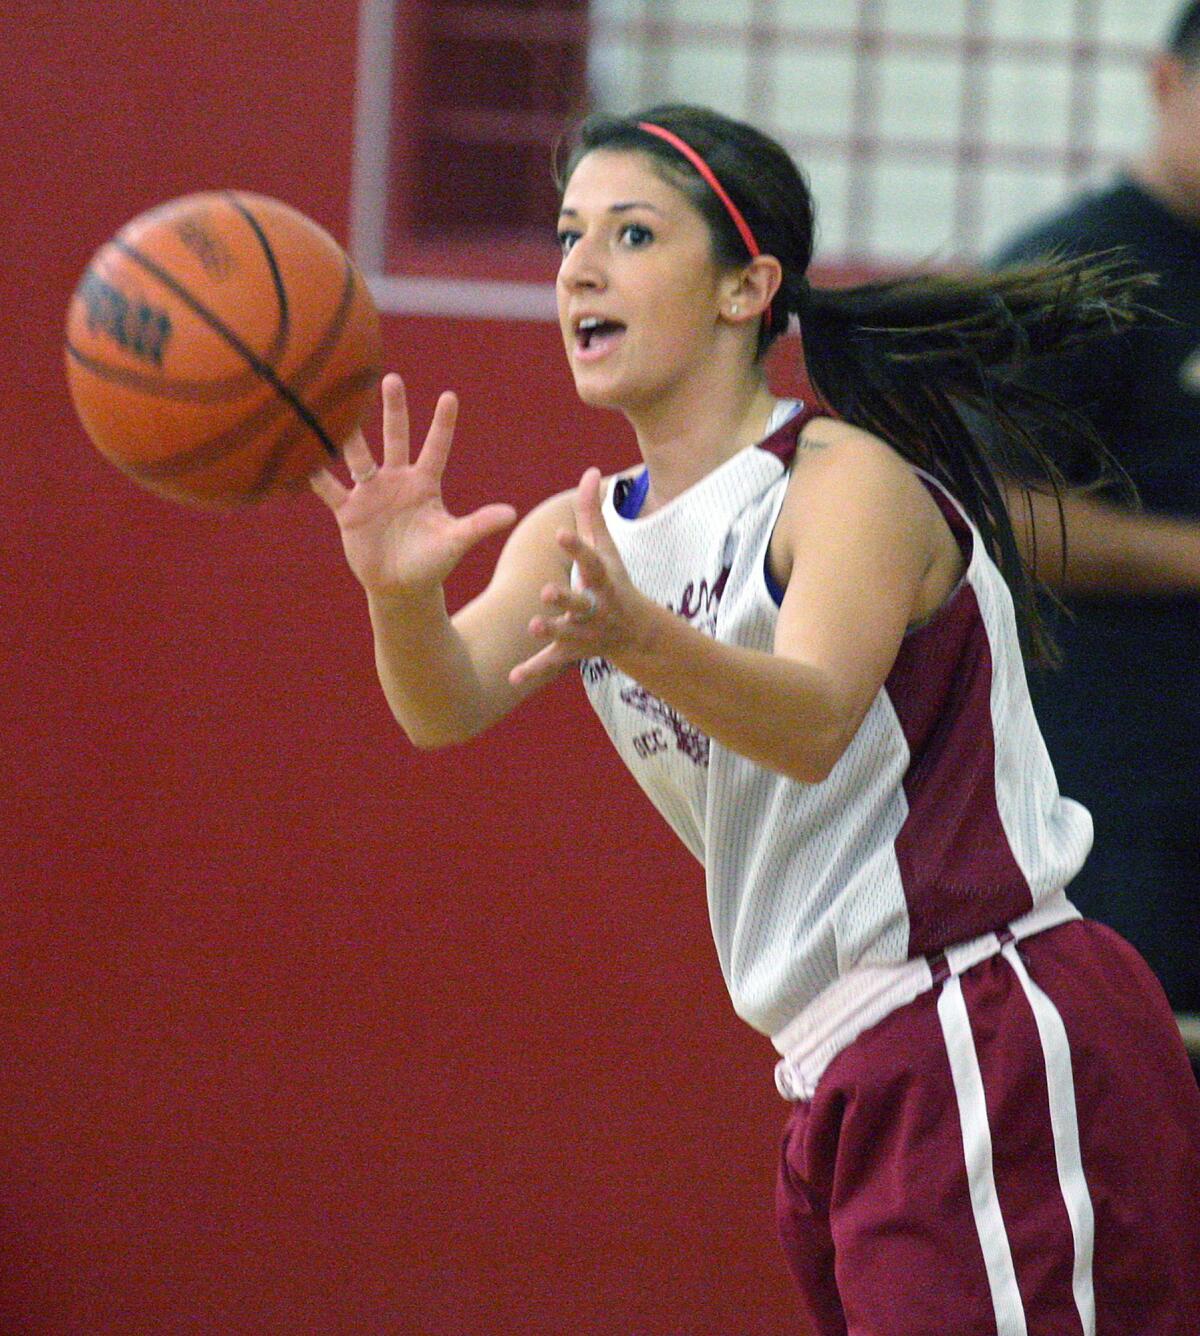 Glendale College's Nicole Pappelis receives a pass during the women's basketball team practice on campus in the Verdugo Gym on Tuesday, Nov. 5, 2013.